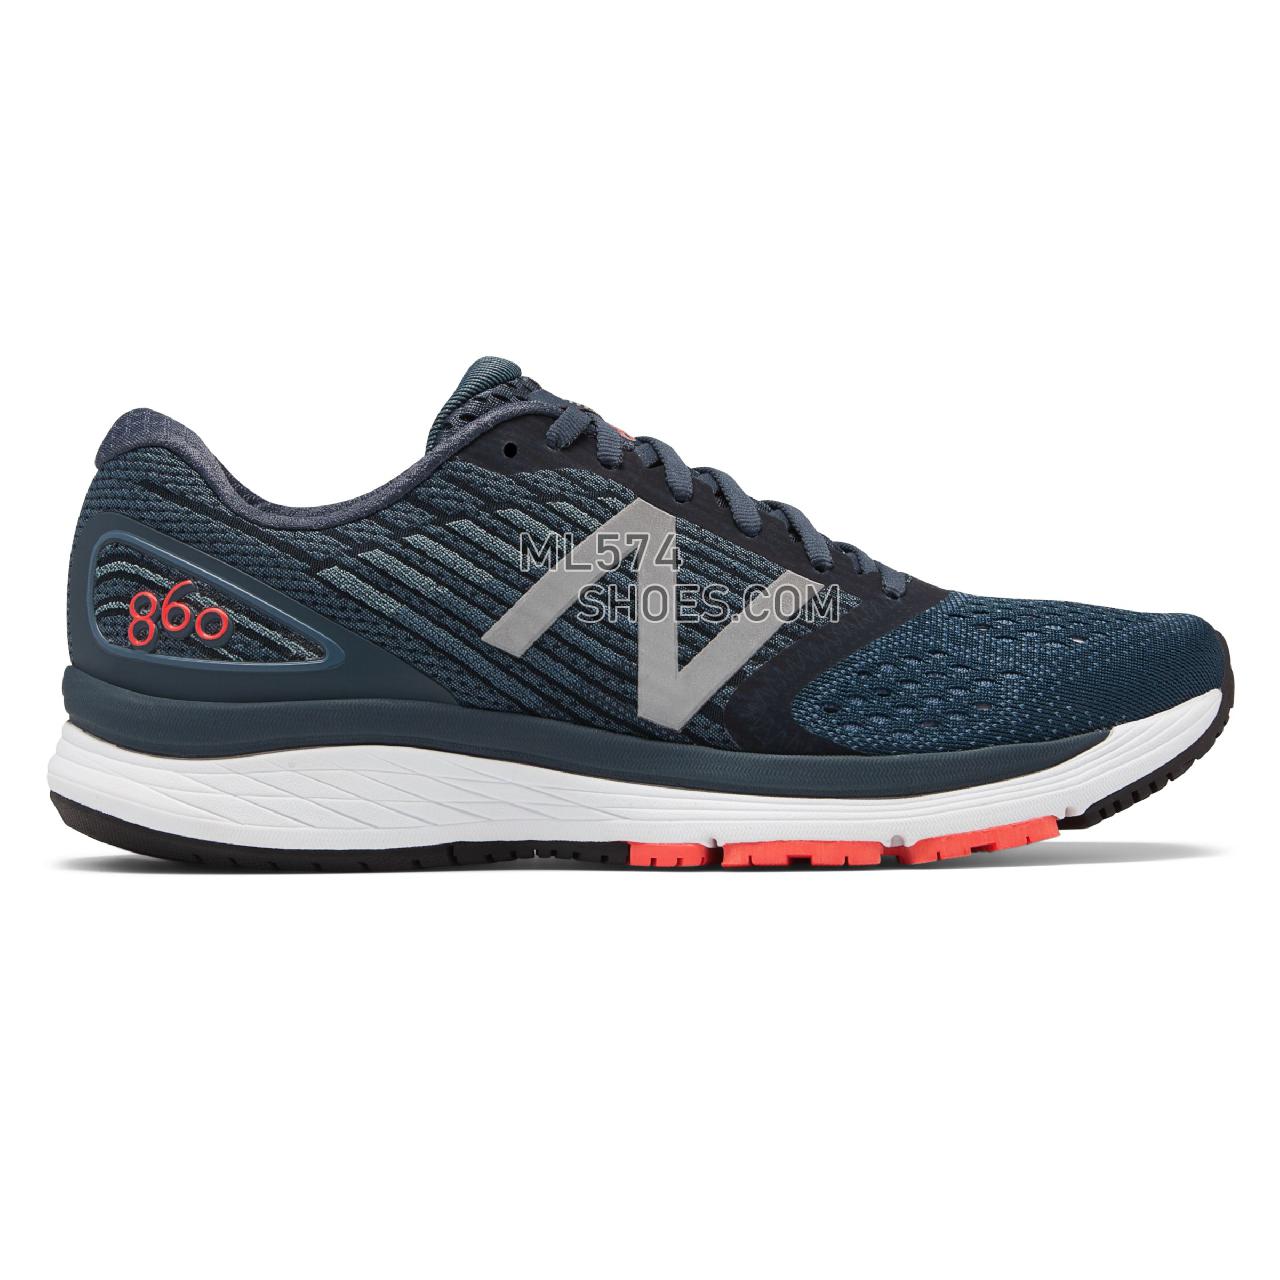 New Balance 860v9 - Men's 860 - Running Petrol with Flame - M860PF9